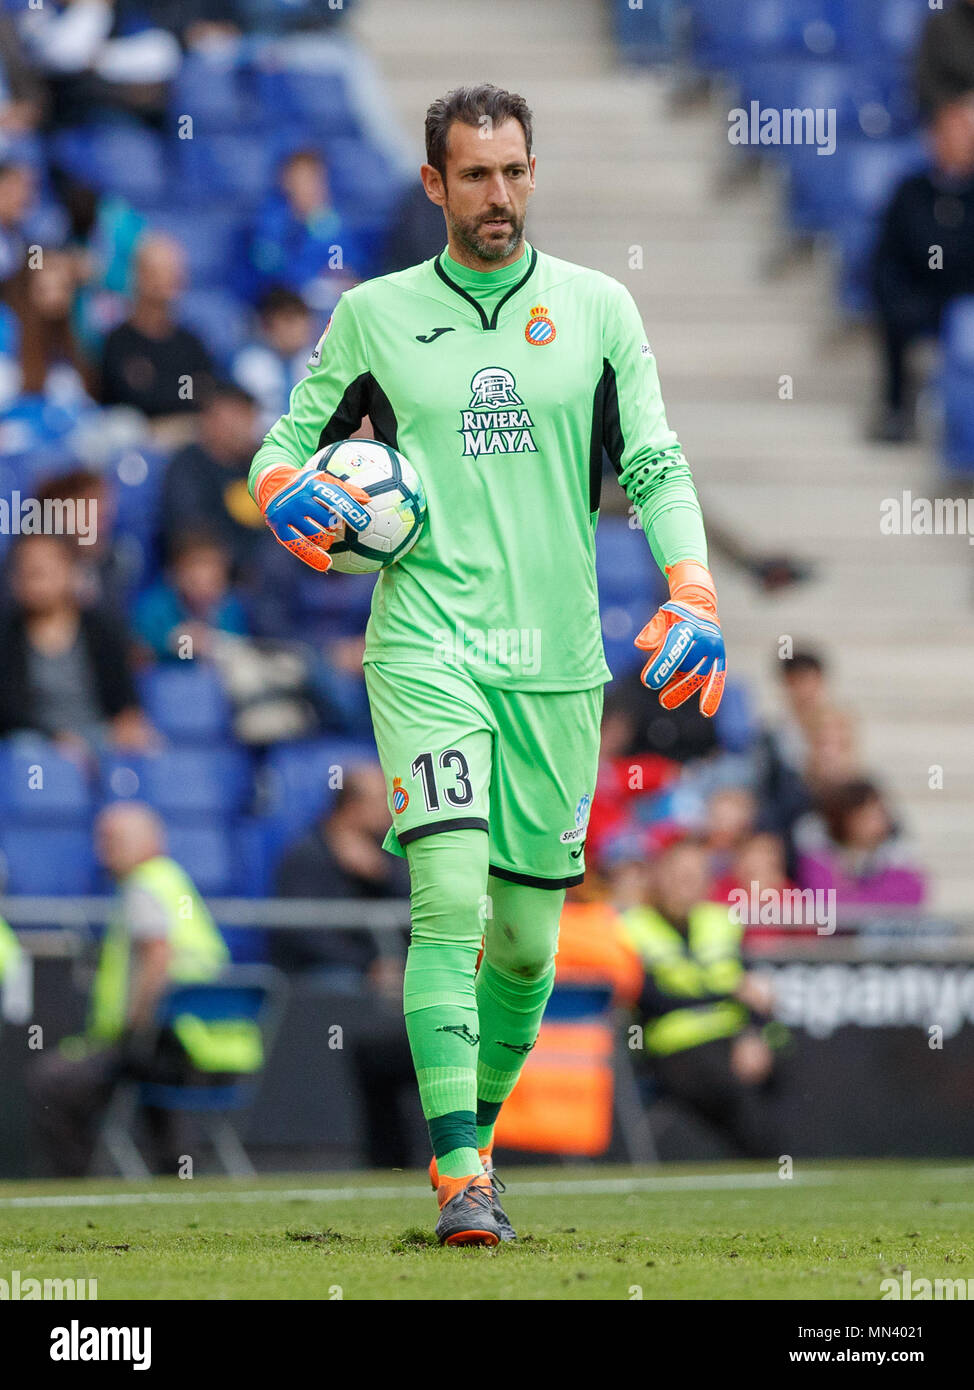 Barcelona, 13th May: Diego Lopez of RCD Espanyol during the 2017/2018  LaLiga Santander Round 37 game between RCD Espanyol and Malaga CF at RCD  Stadium on May 13, 2018 in Barcelona, Spain.